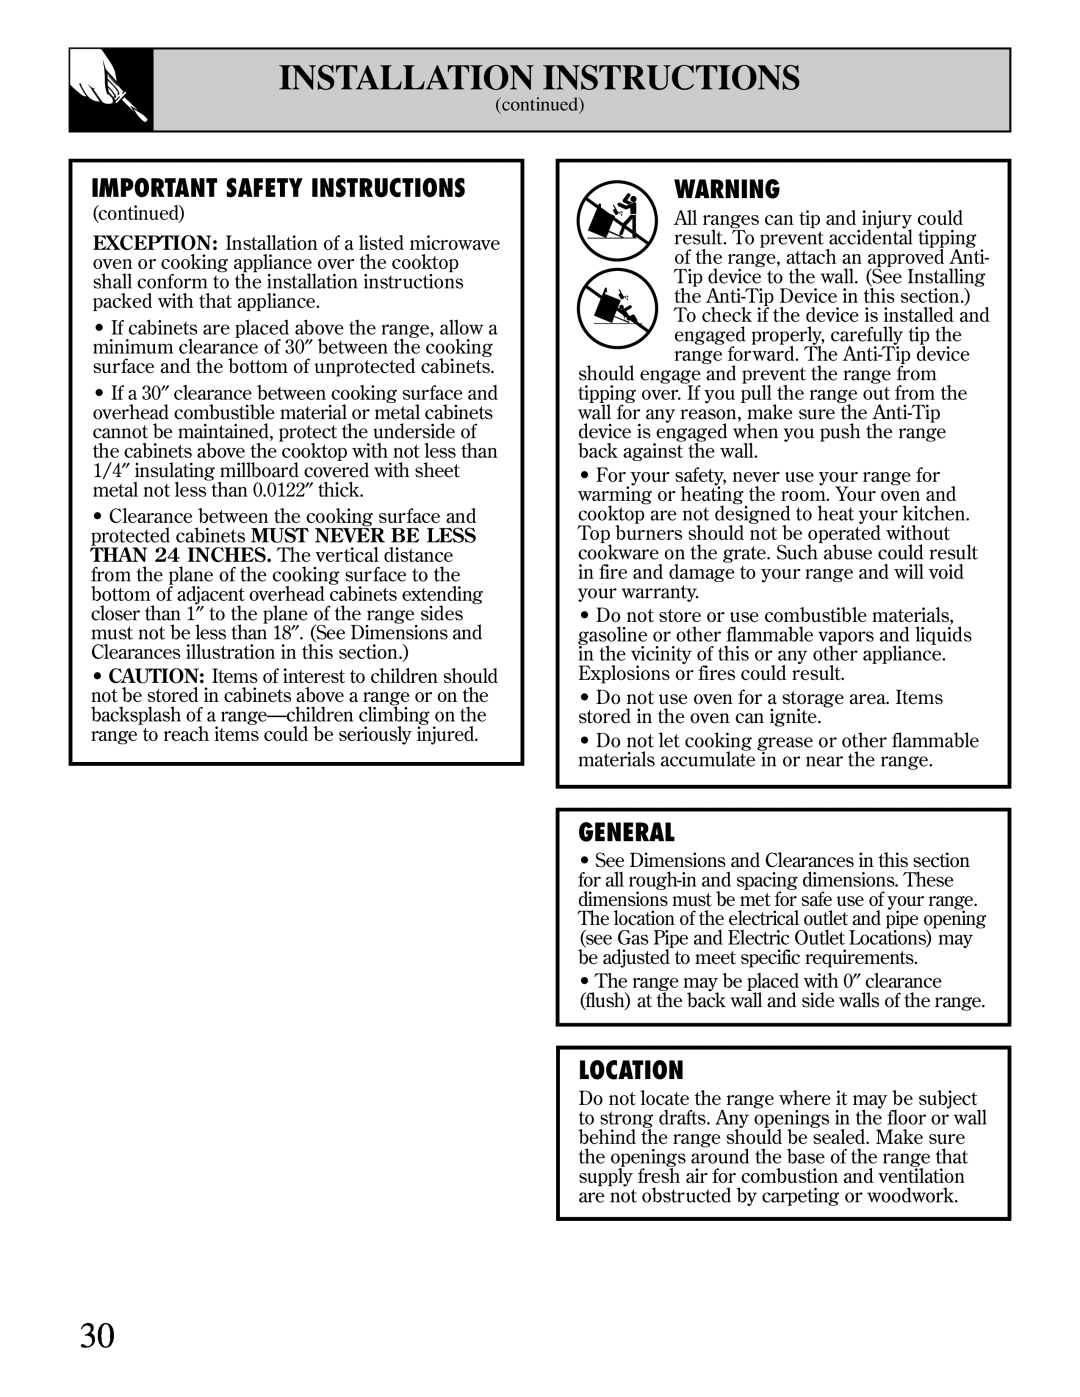 GE XL44 manual Important Safety Instructions, General, Location, Installation Instructions 